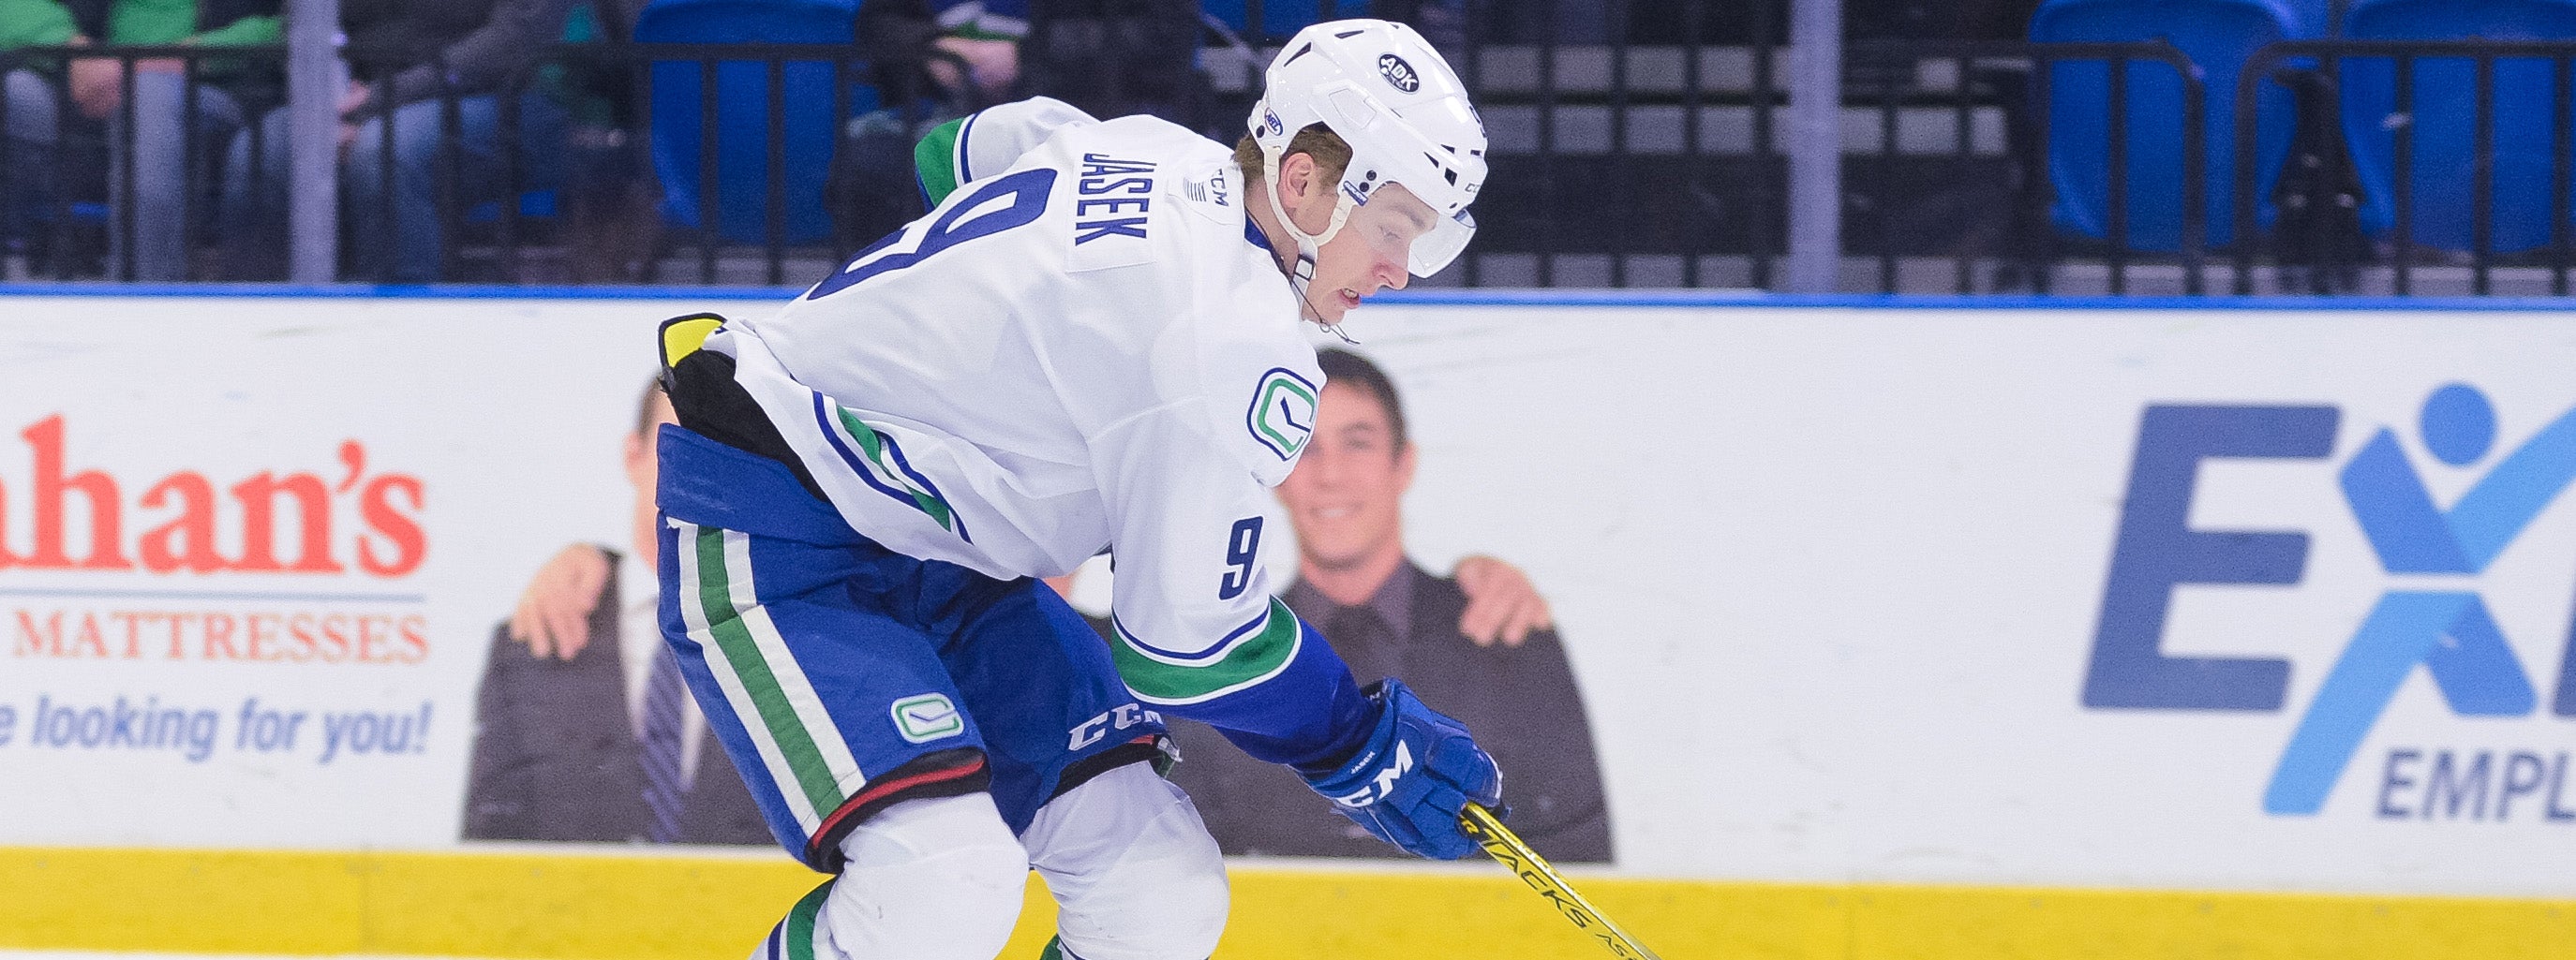 COMETS RETURN HOME TO HOST MARLIES